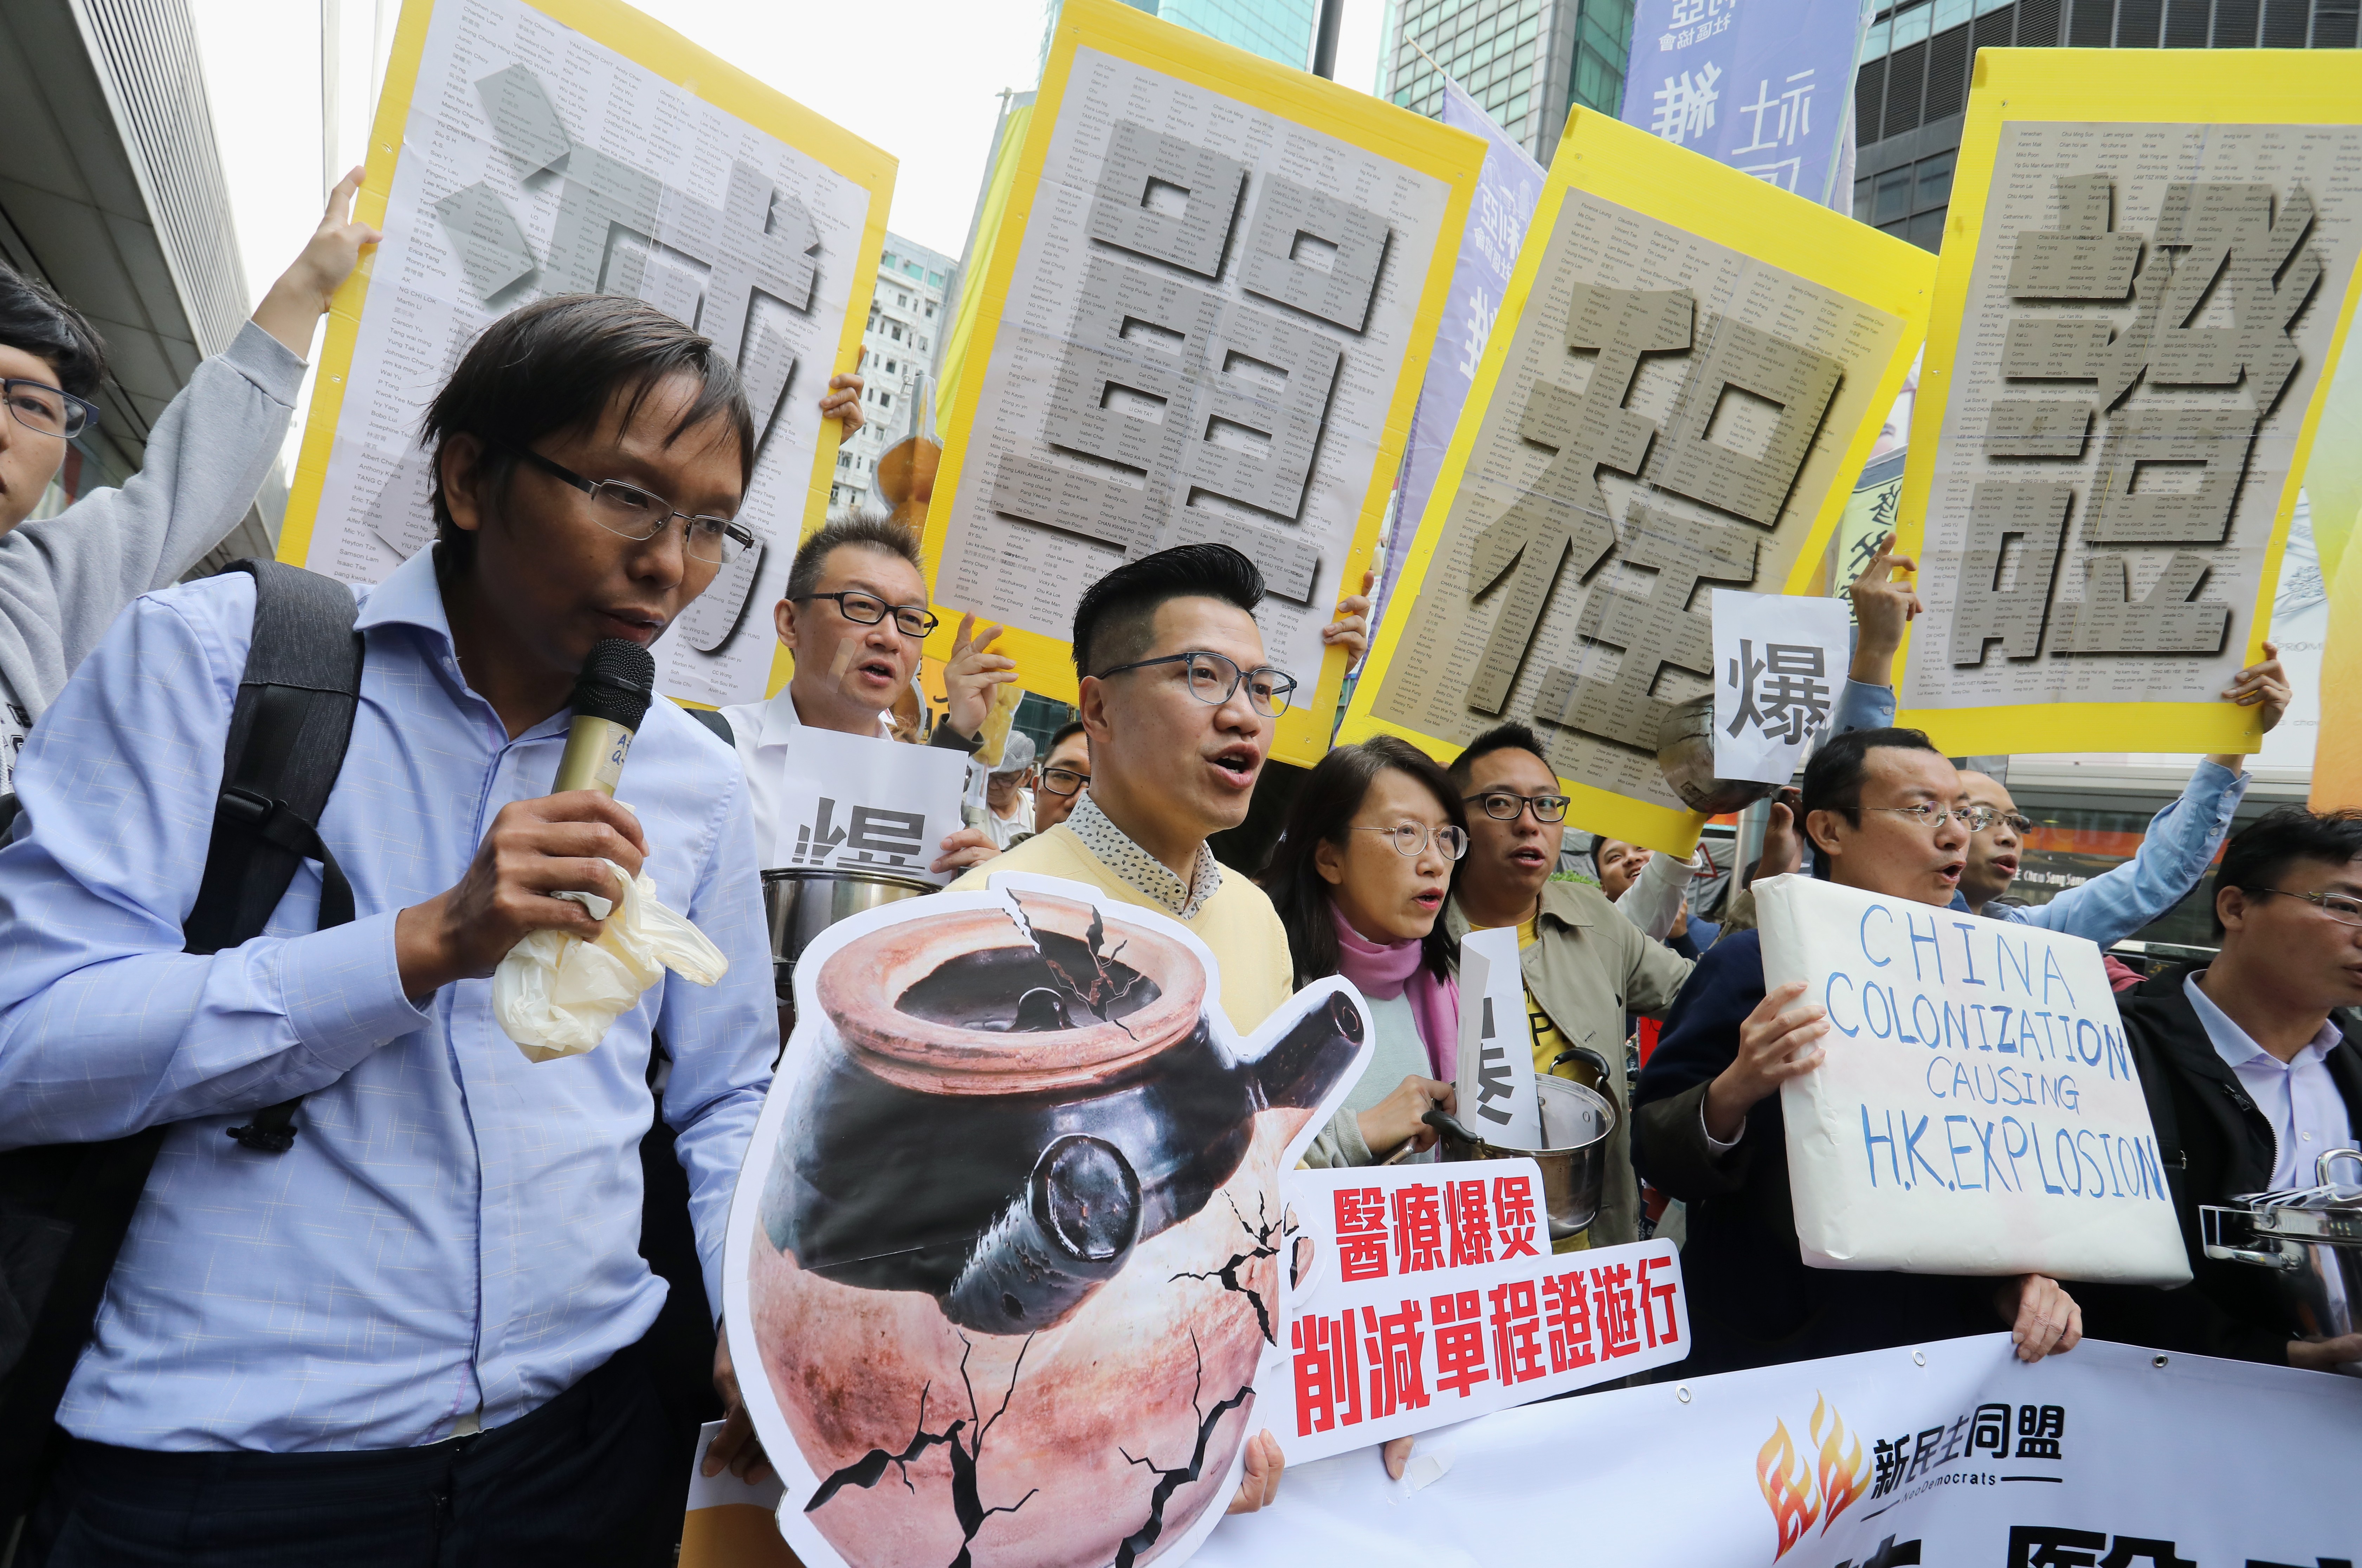 Those concerned about migrants overburdening Hong Kong’s public services, especially public health, should stick to rational policy discussions. Photo: Dickson Lee